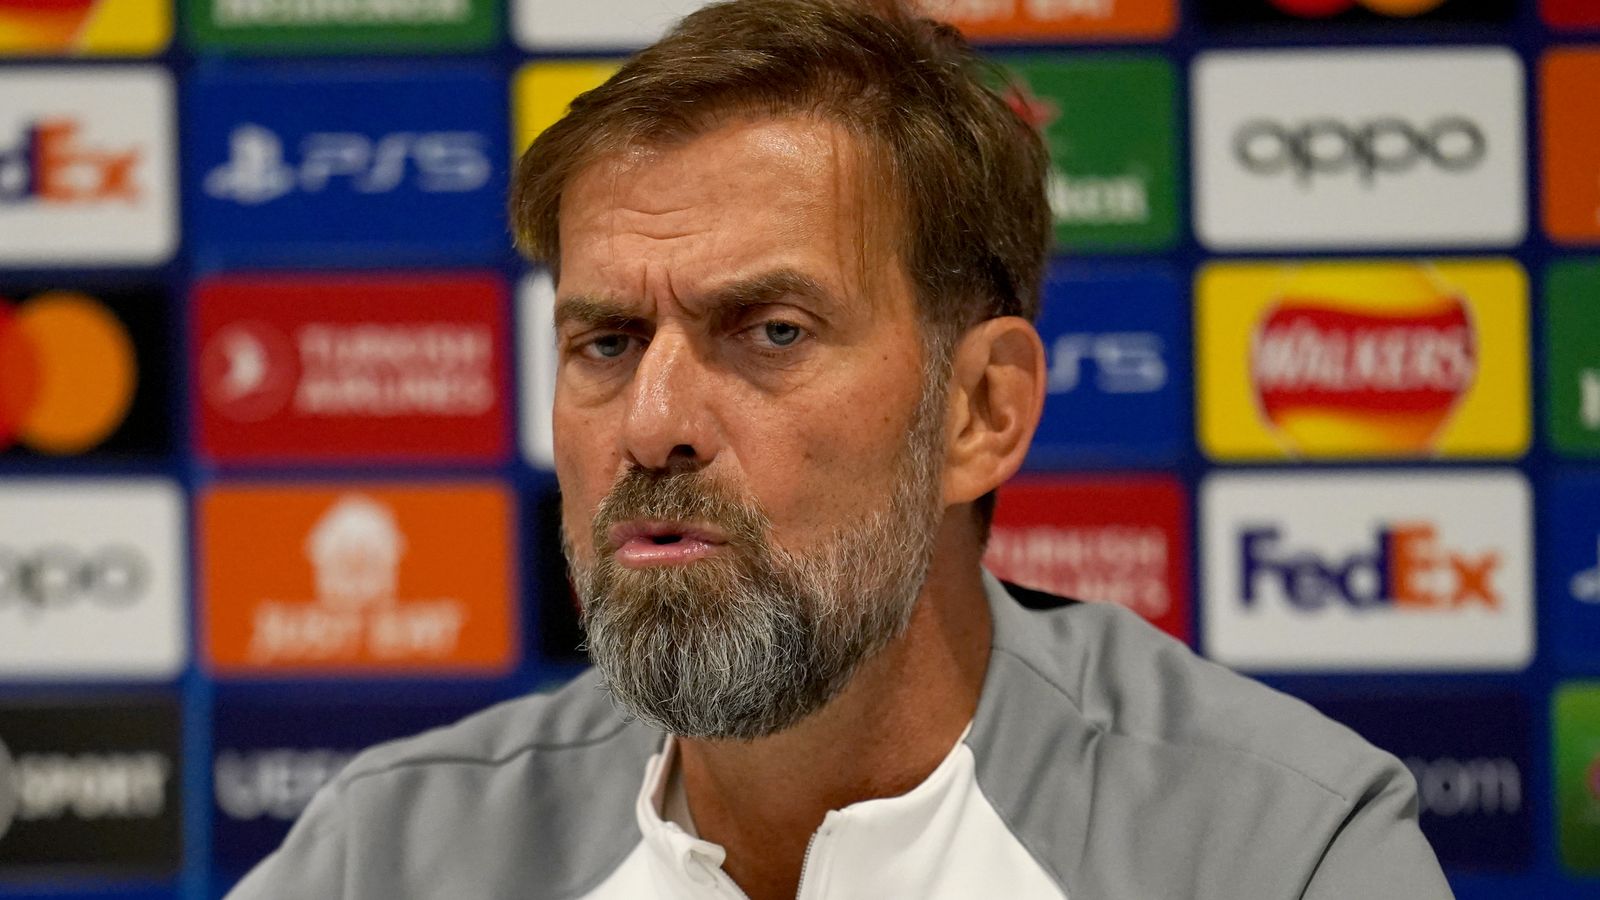 jurgen-klopp-liverpool-manager-says-judgement-on-his-team-should-be-reserved-until-the-end-of-the-season